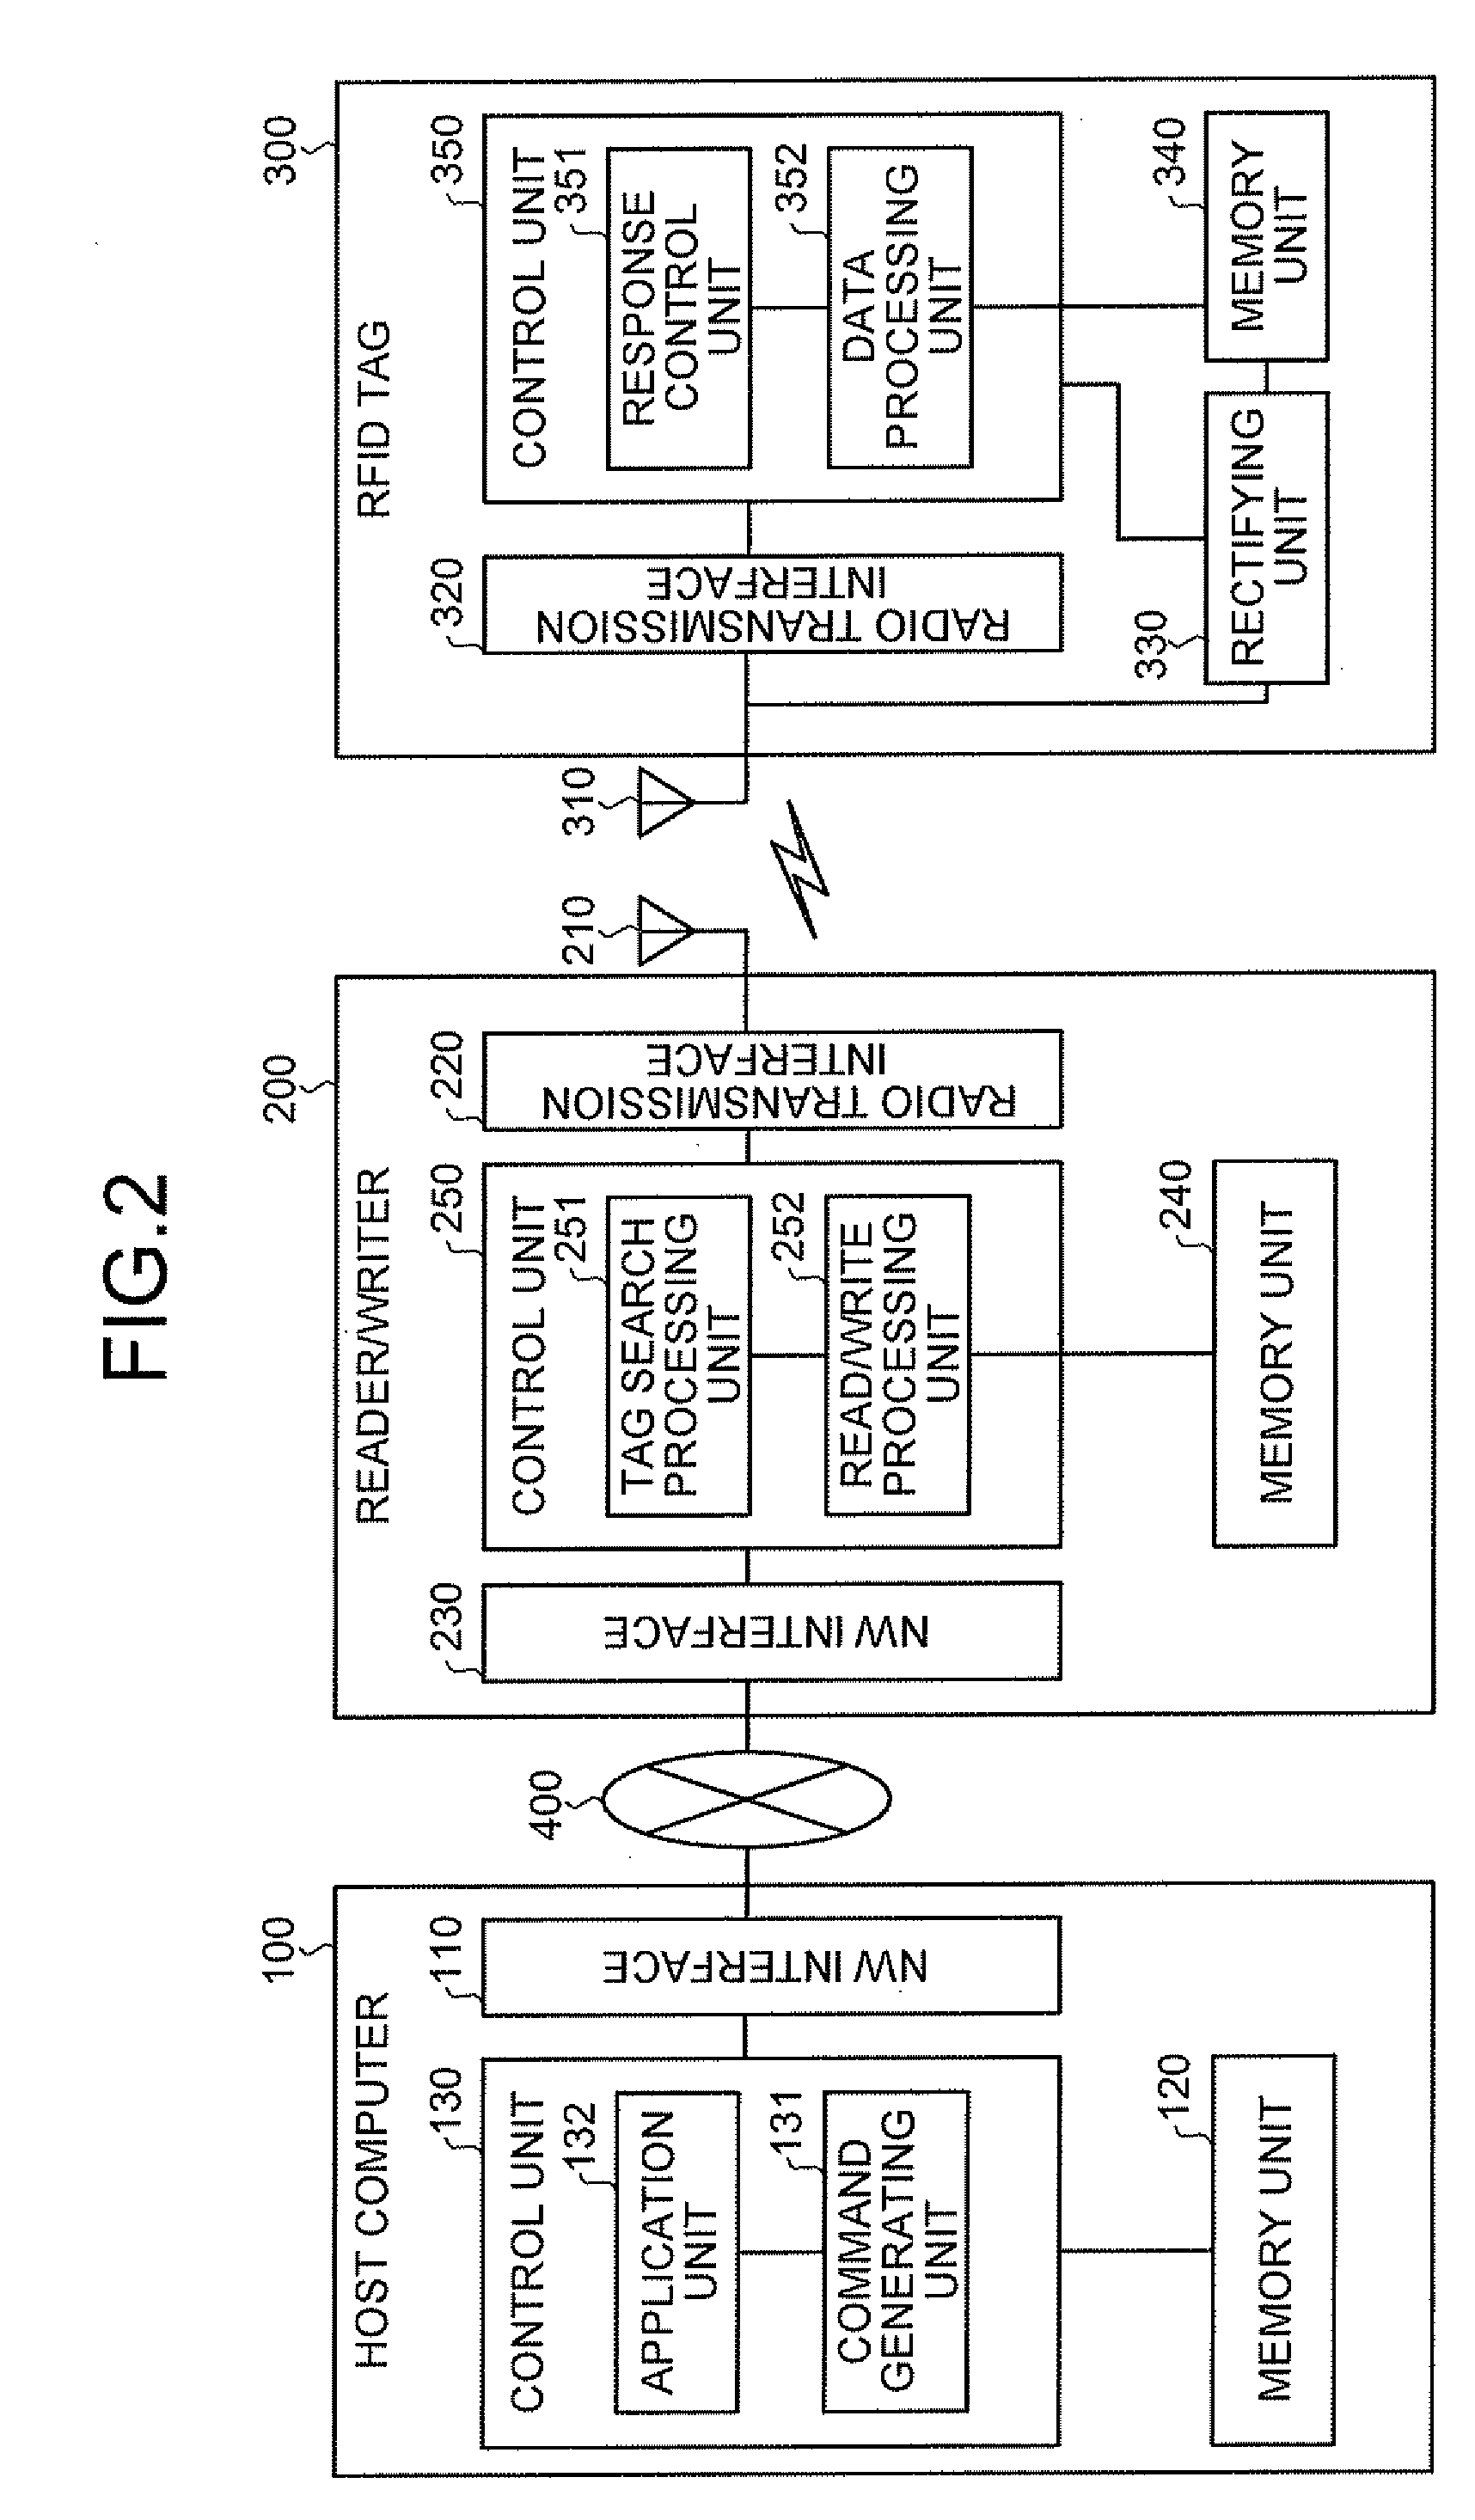 Reader/writer apparatus, data access system, data access control method, and computer product